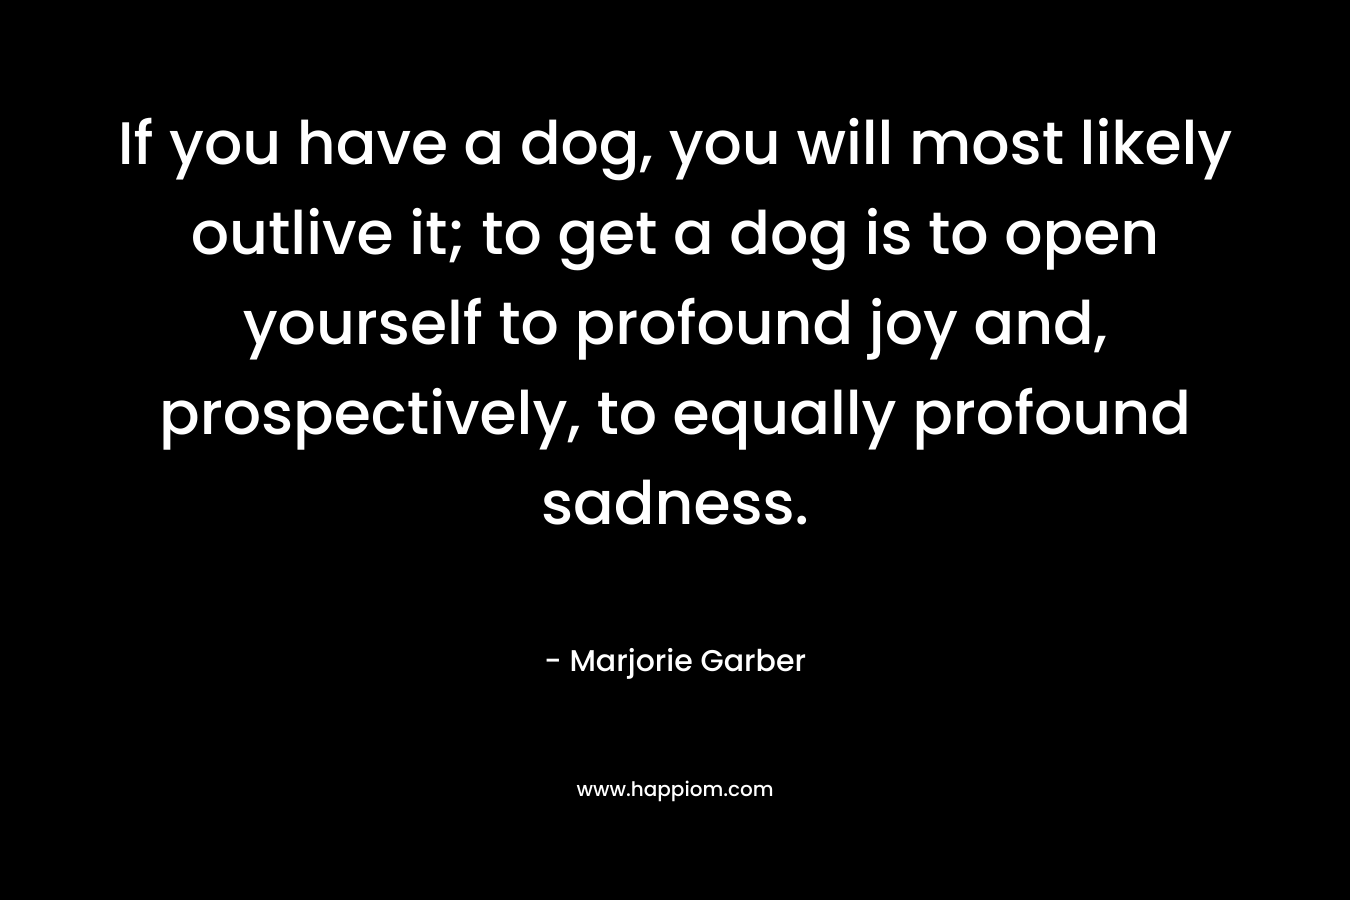 If you have a dog, you will most likely outlive it; to get a dog is to open yourself to profound joy and, prospectively, to equally profound sadness.